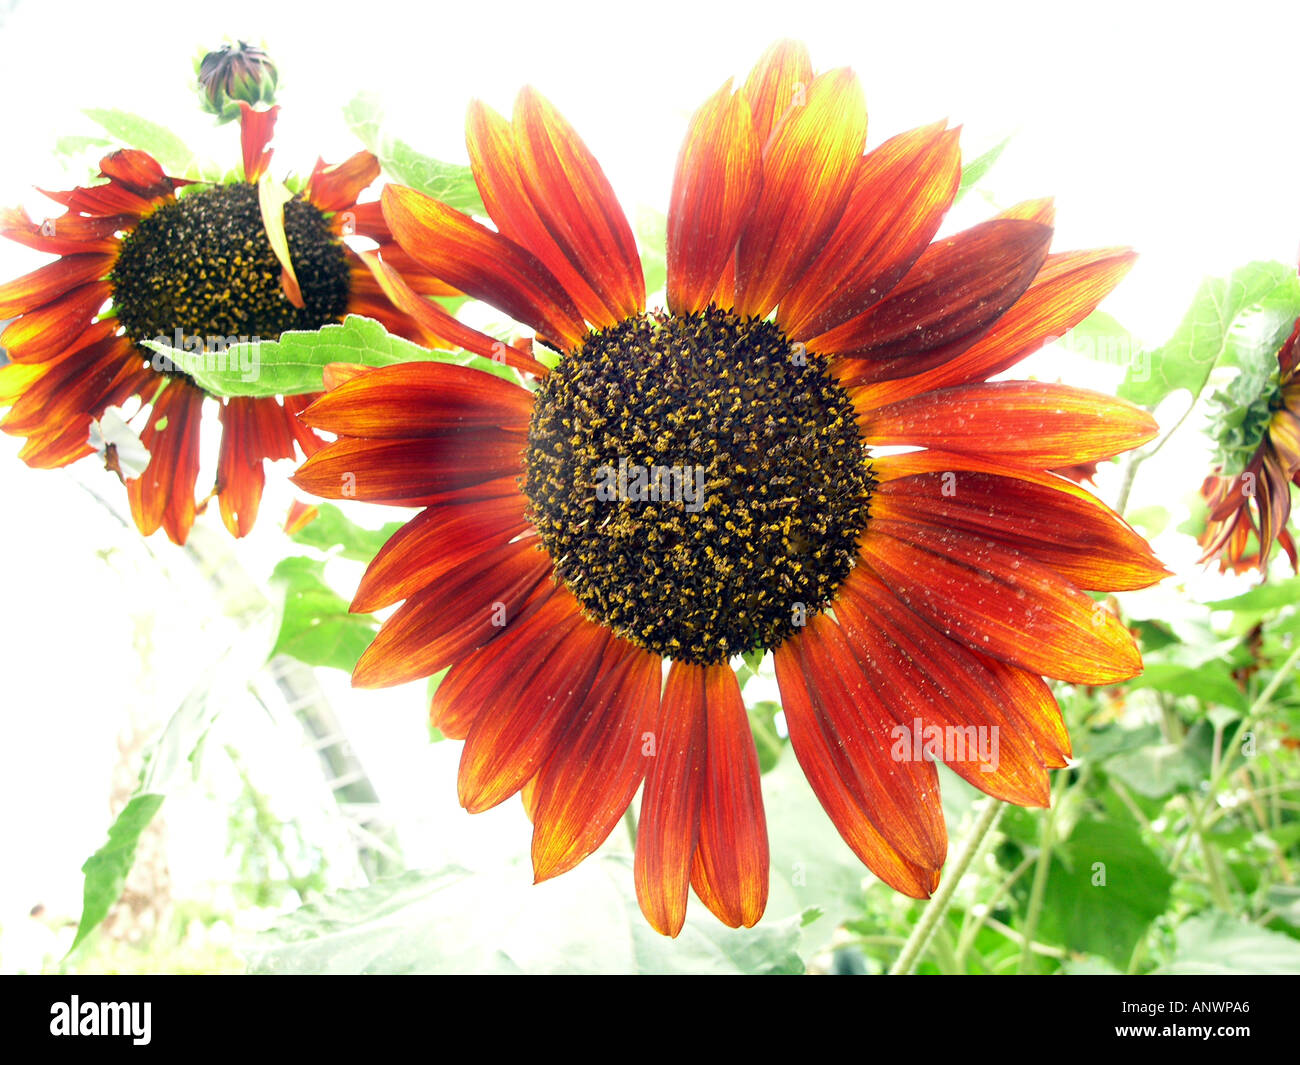 Red and yellow Helianthus Debilis Sunflower strongly backlit Stock Photo